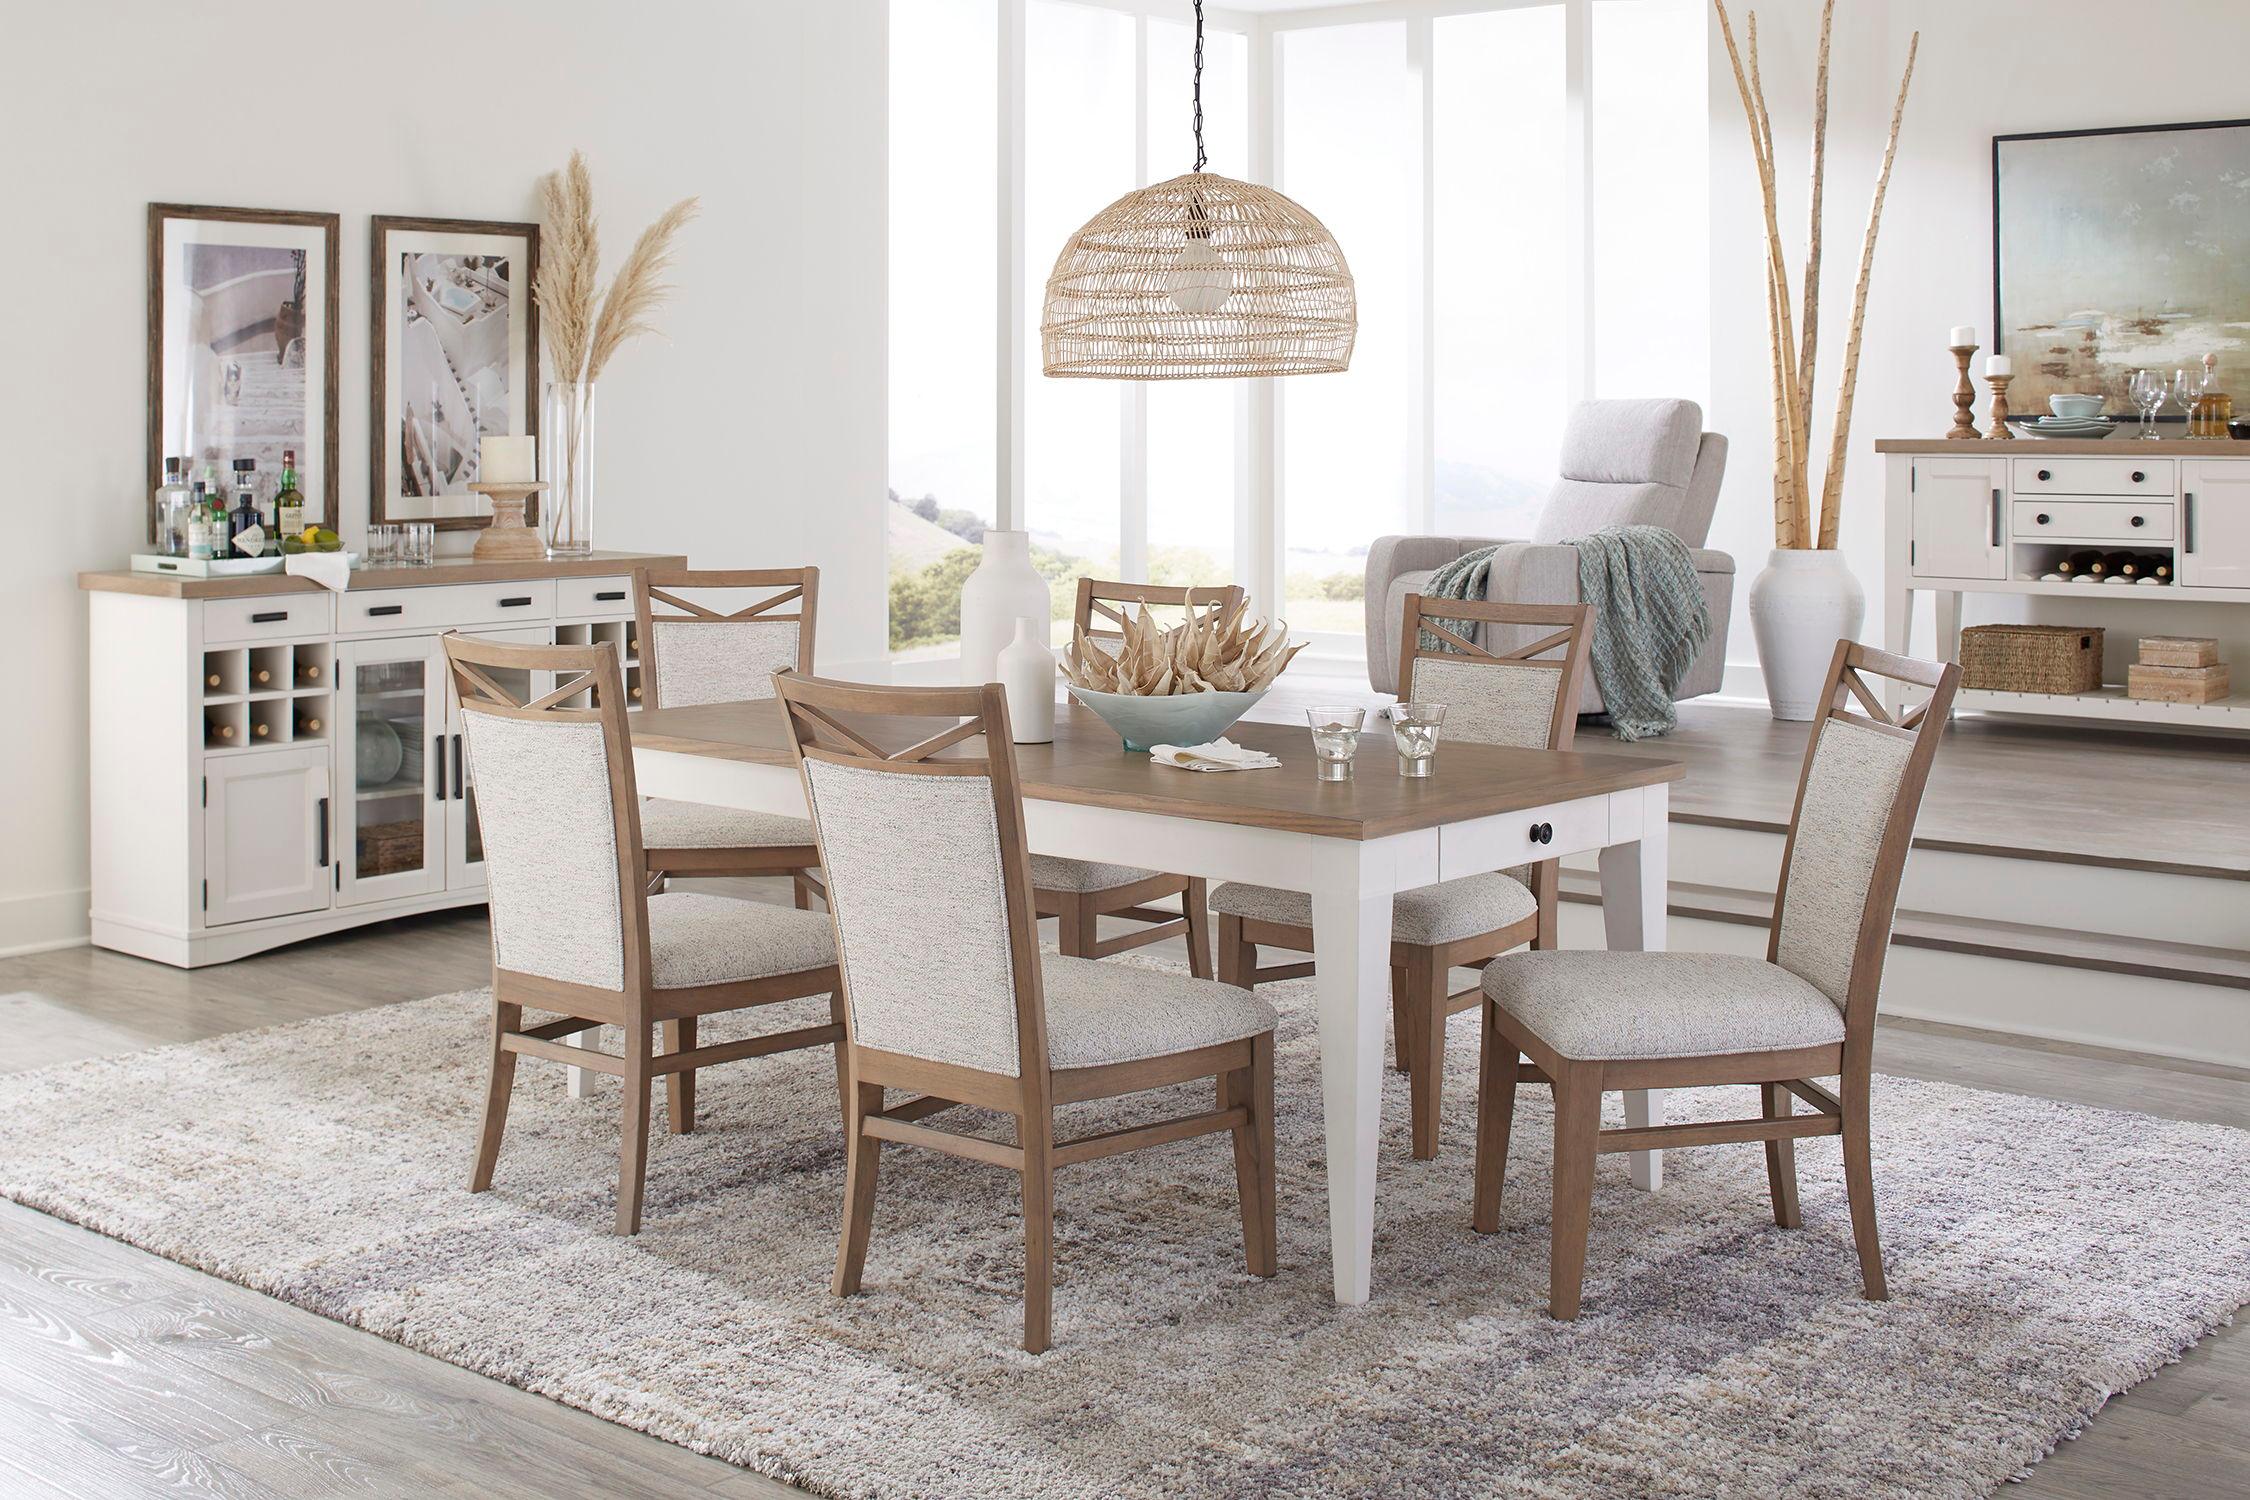 Parker House Furniture - Americana Modern Dining - Rectangular Extendable Dining Table With 6 Upholstered Dining Chairs - Light Brown - 5th Avenue Furniture